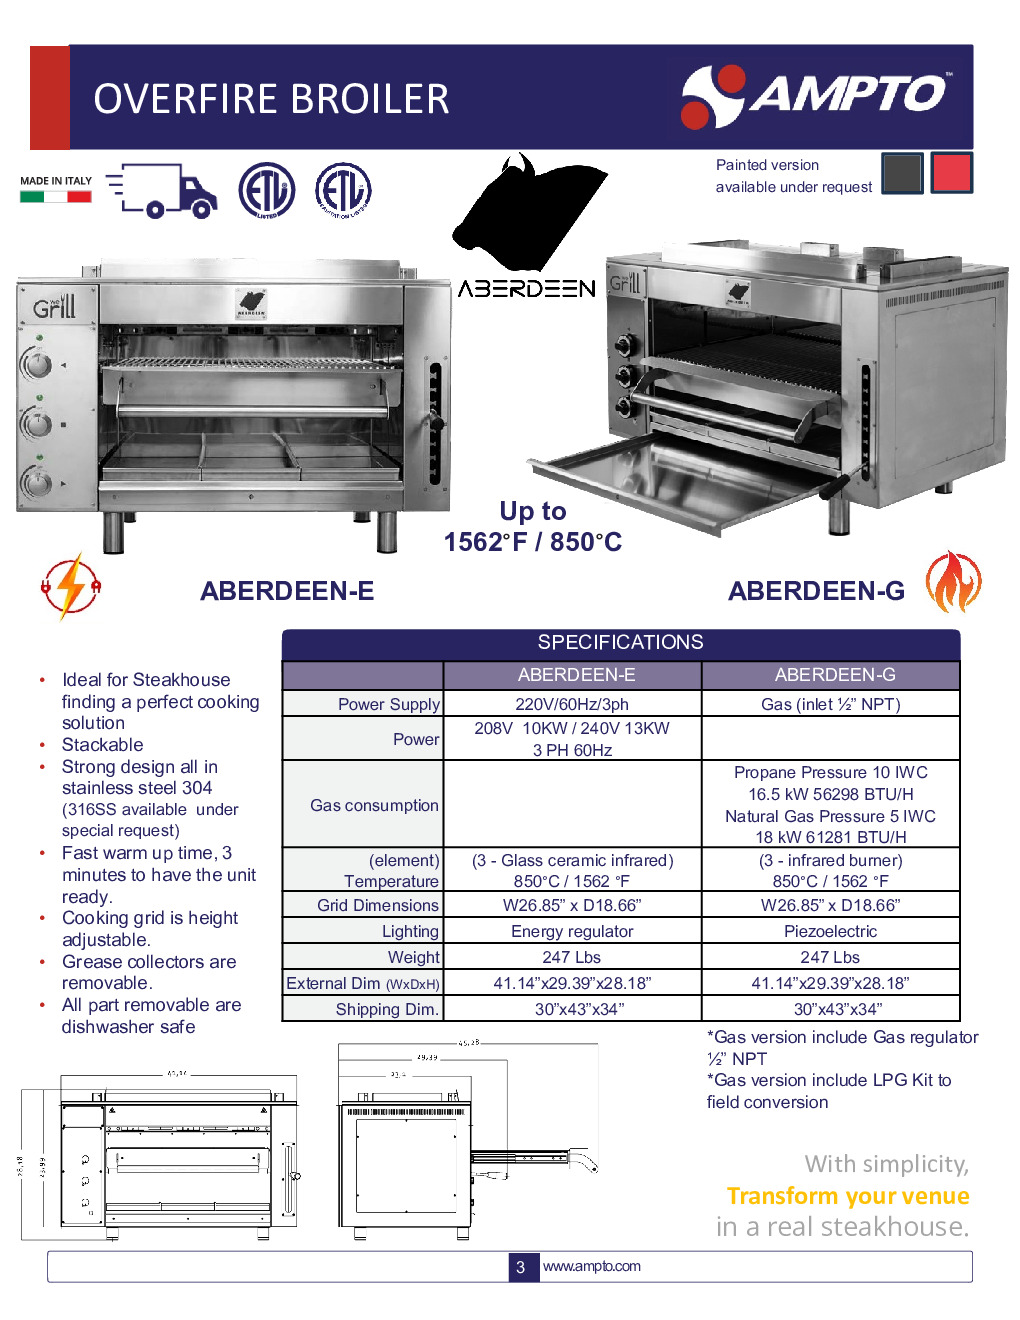 AMPTO HEREFORD-E Electric Deck-Type Broiler